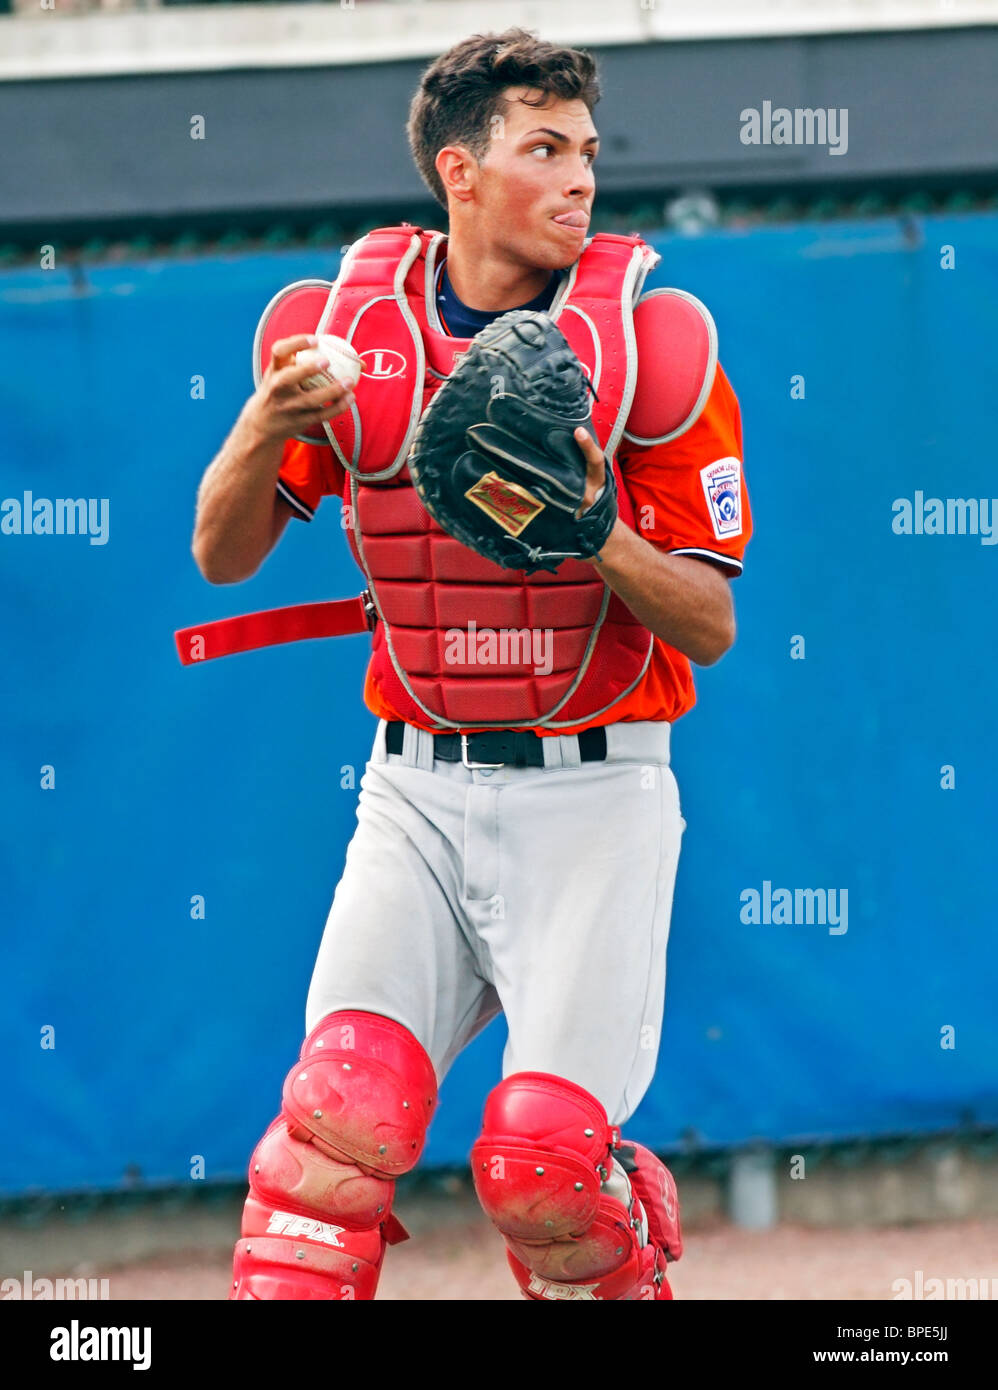 Catcher Alessandro Grimaudo of Europe-Middle East-Africa (Lazio, Italy) at the 2010 Senior League Baseball World Series. Stock Photo